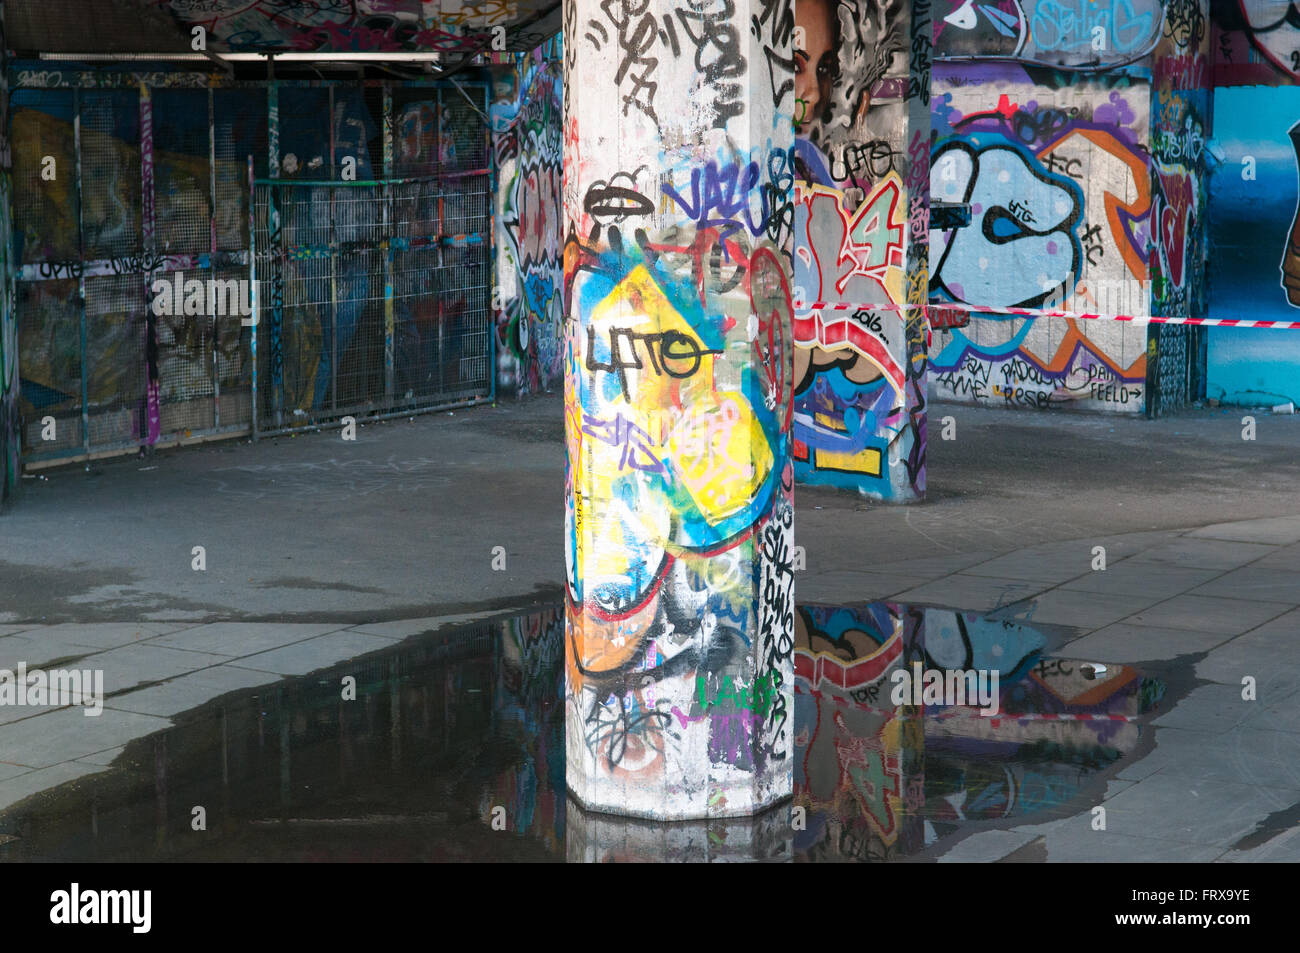 Urban scene in a city with graffiti on the walls Stock Photo